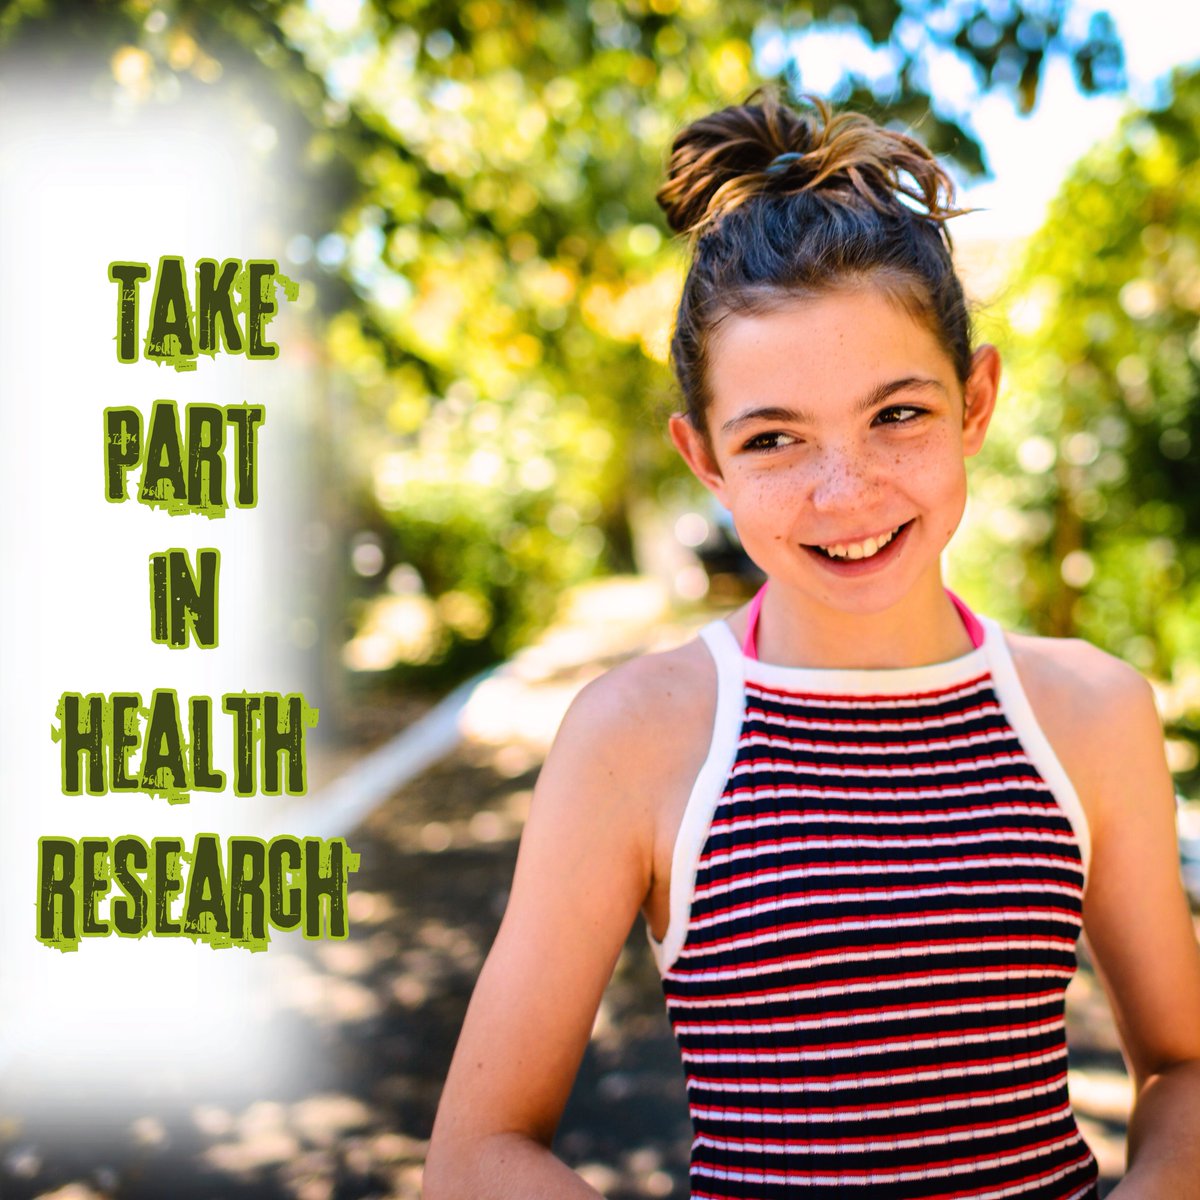 😀 Young people age 11+ can make a difference to health in Scotland. 🌟 Join the SHARE register with your child. ✅ By taking part, they can contribute to finding cures and bringing hope to thousands. 🔗 registerforshare.org #YoungScots #HealthResearch #Scotland